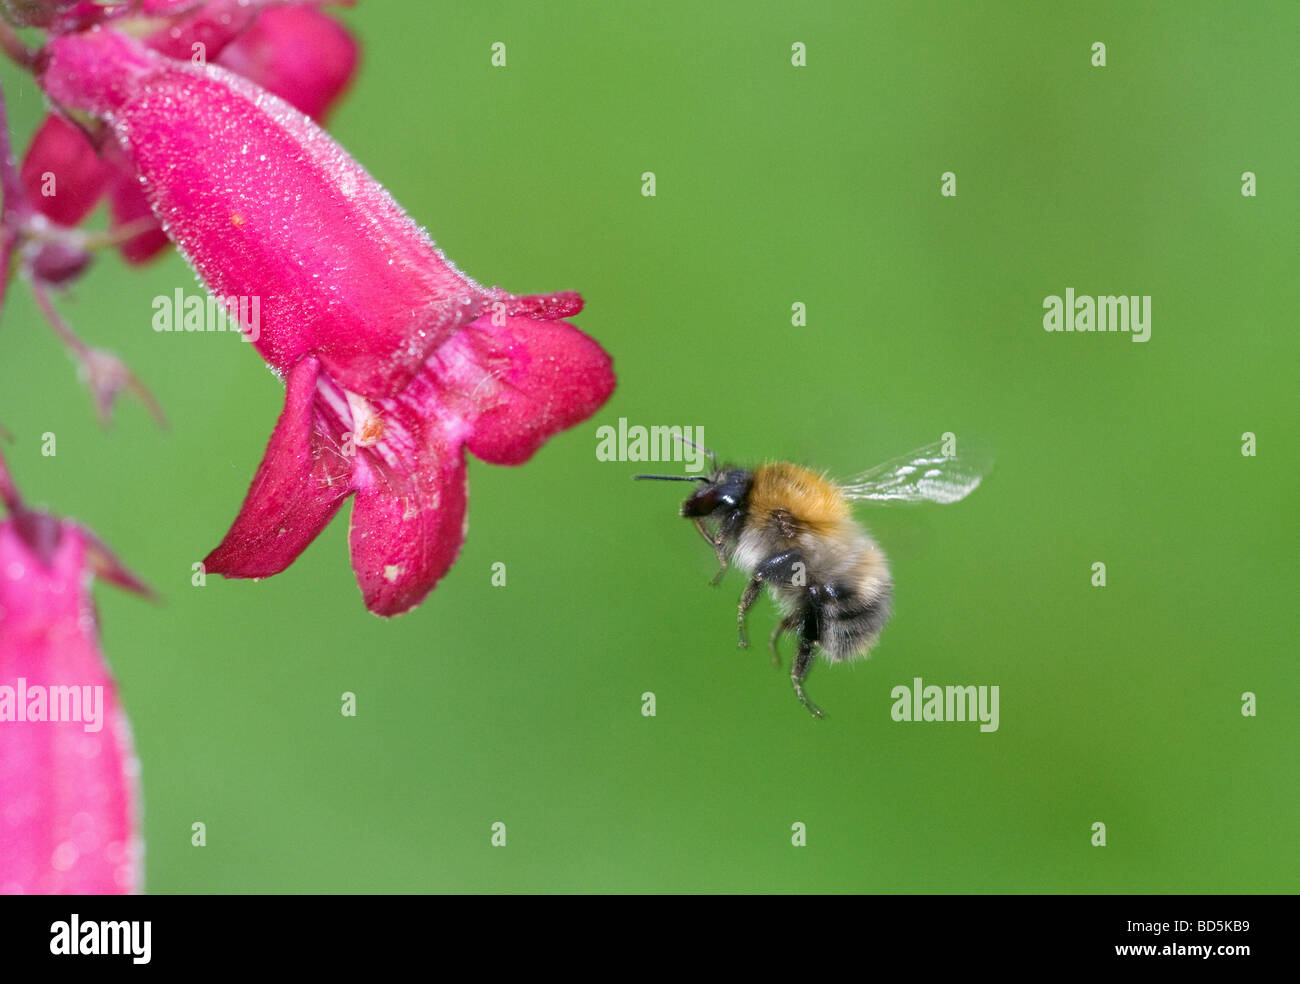 bumble bee in flight heading for a pink penstemon flower Stock Photo